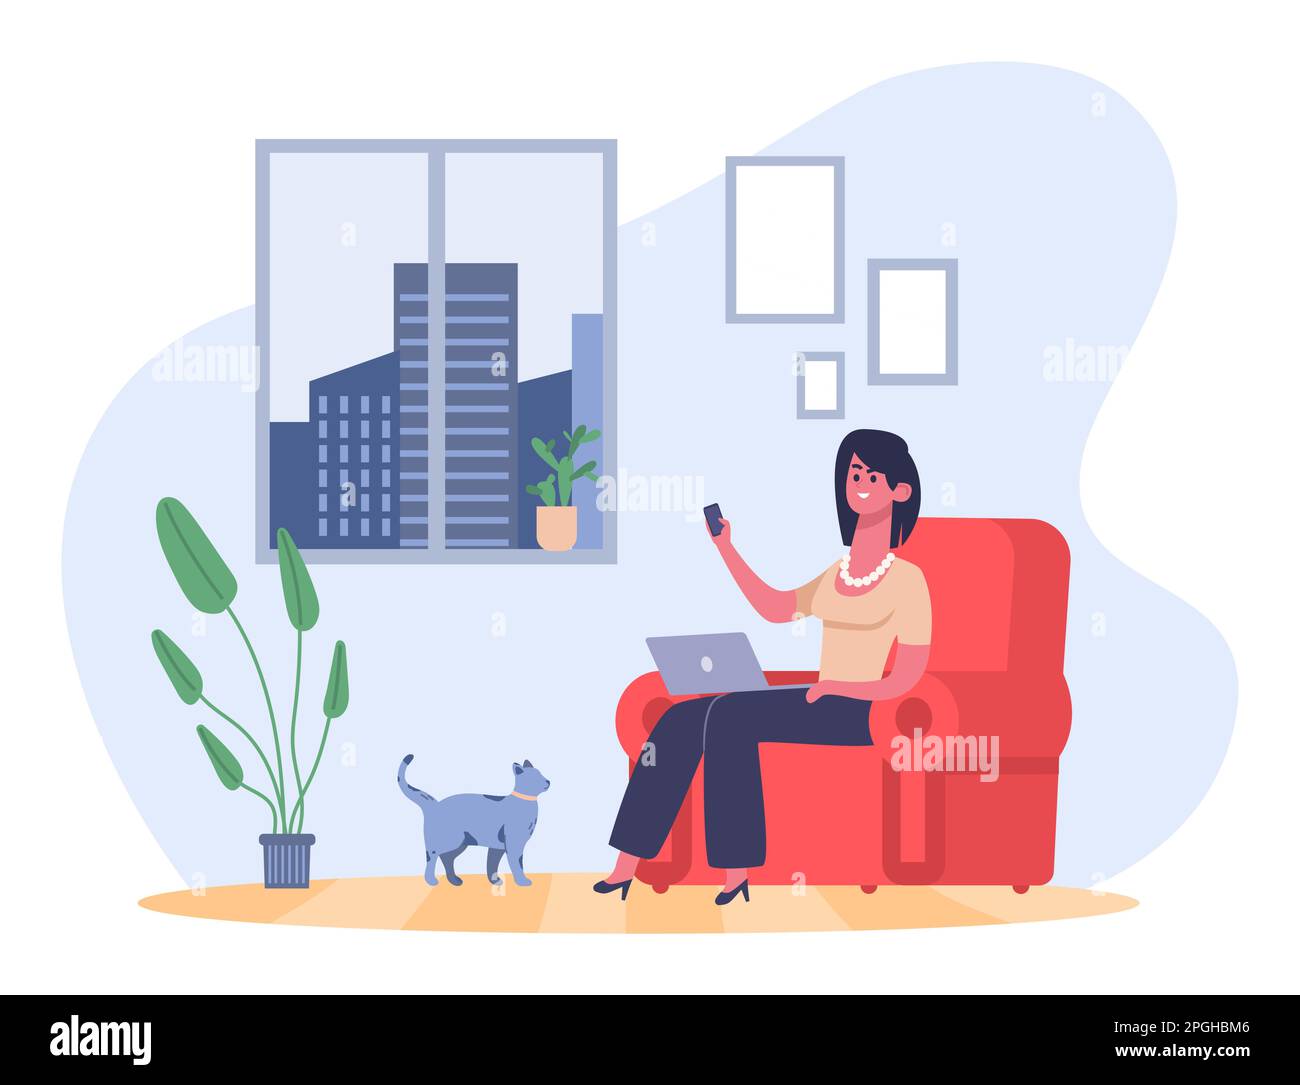 Freelance working person concept. Businesswoman sitting in armchair with laptop and smartphone. Female character Stock Vector